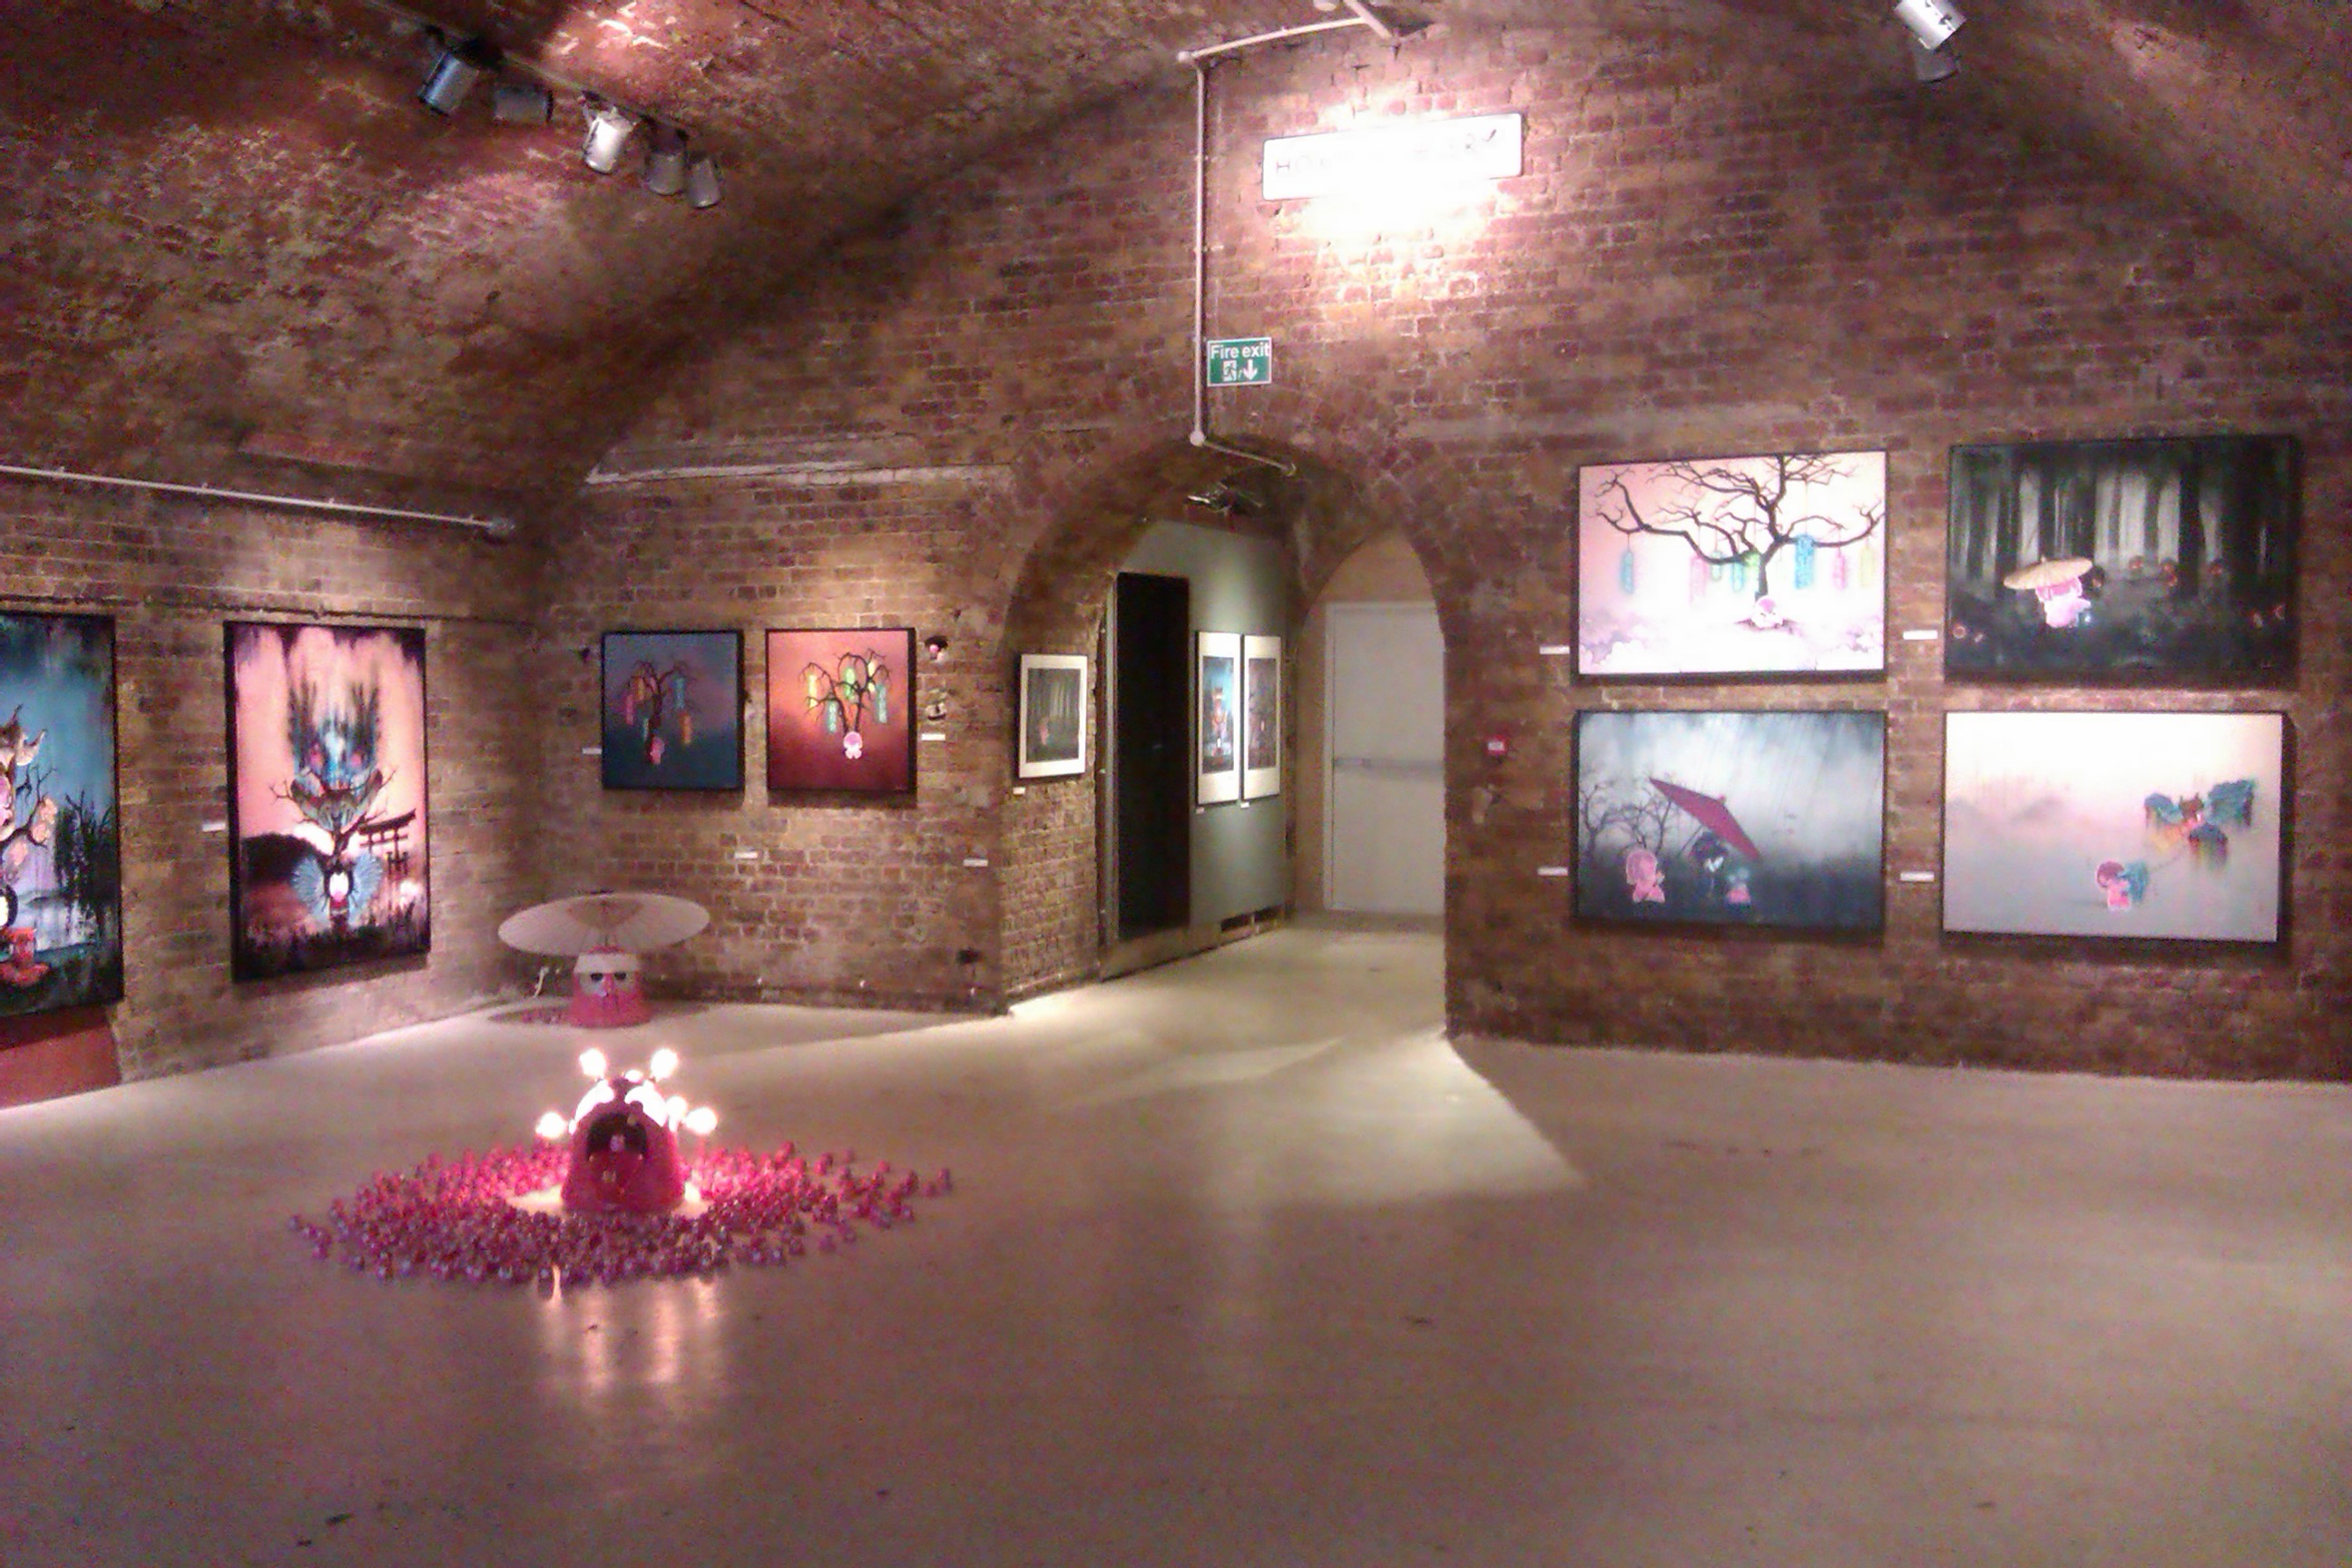 Hoxton Gallery